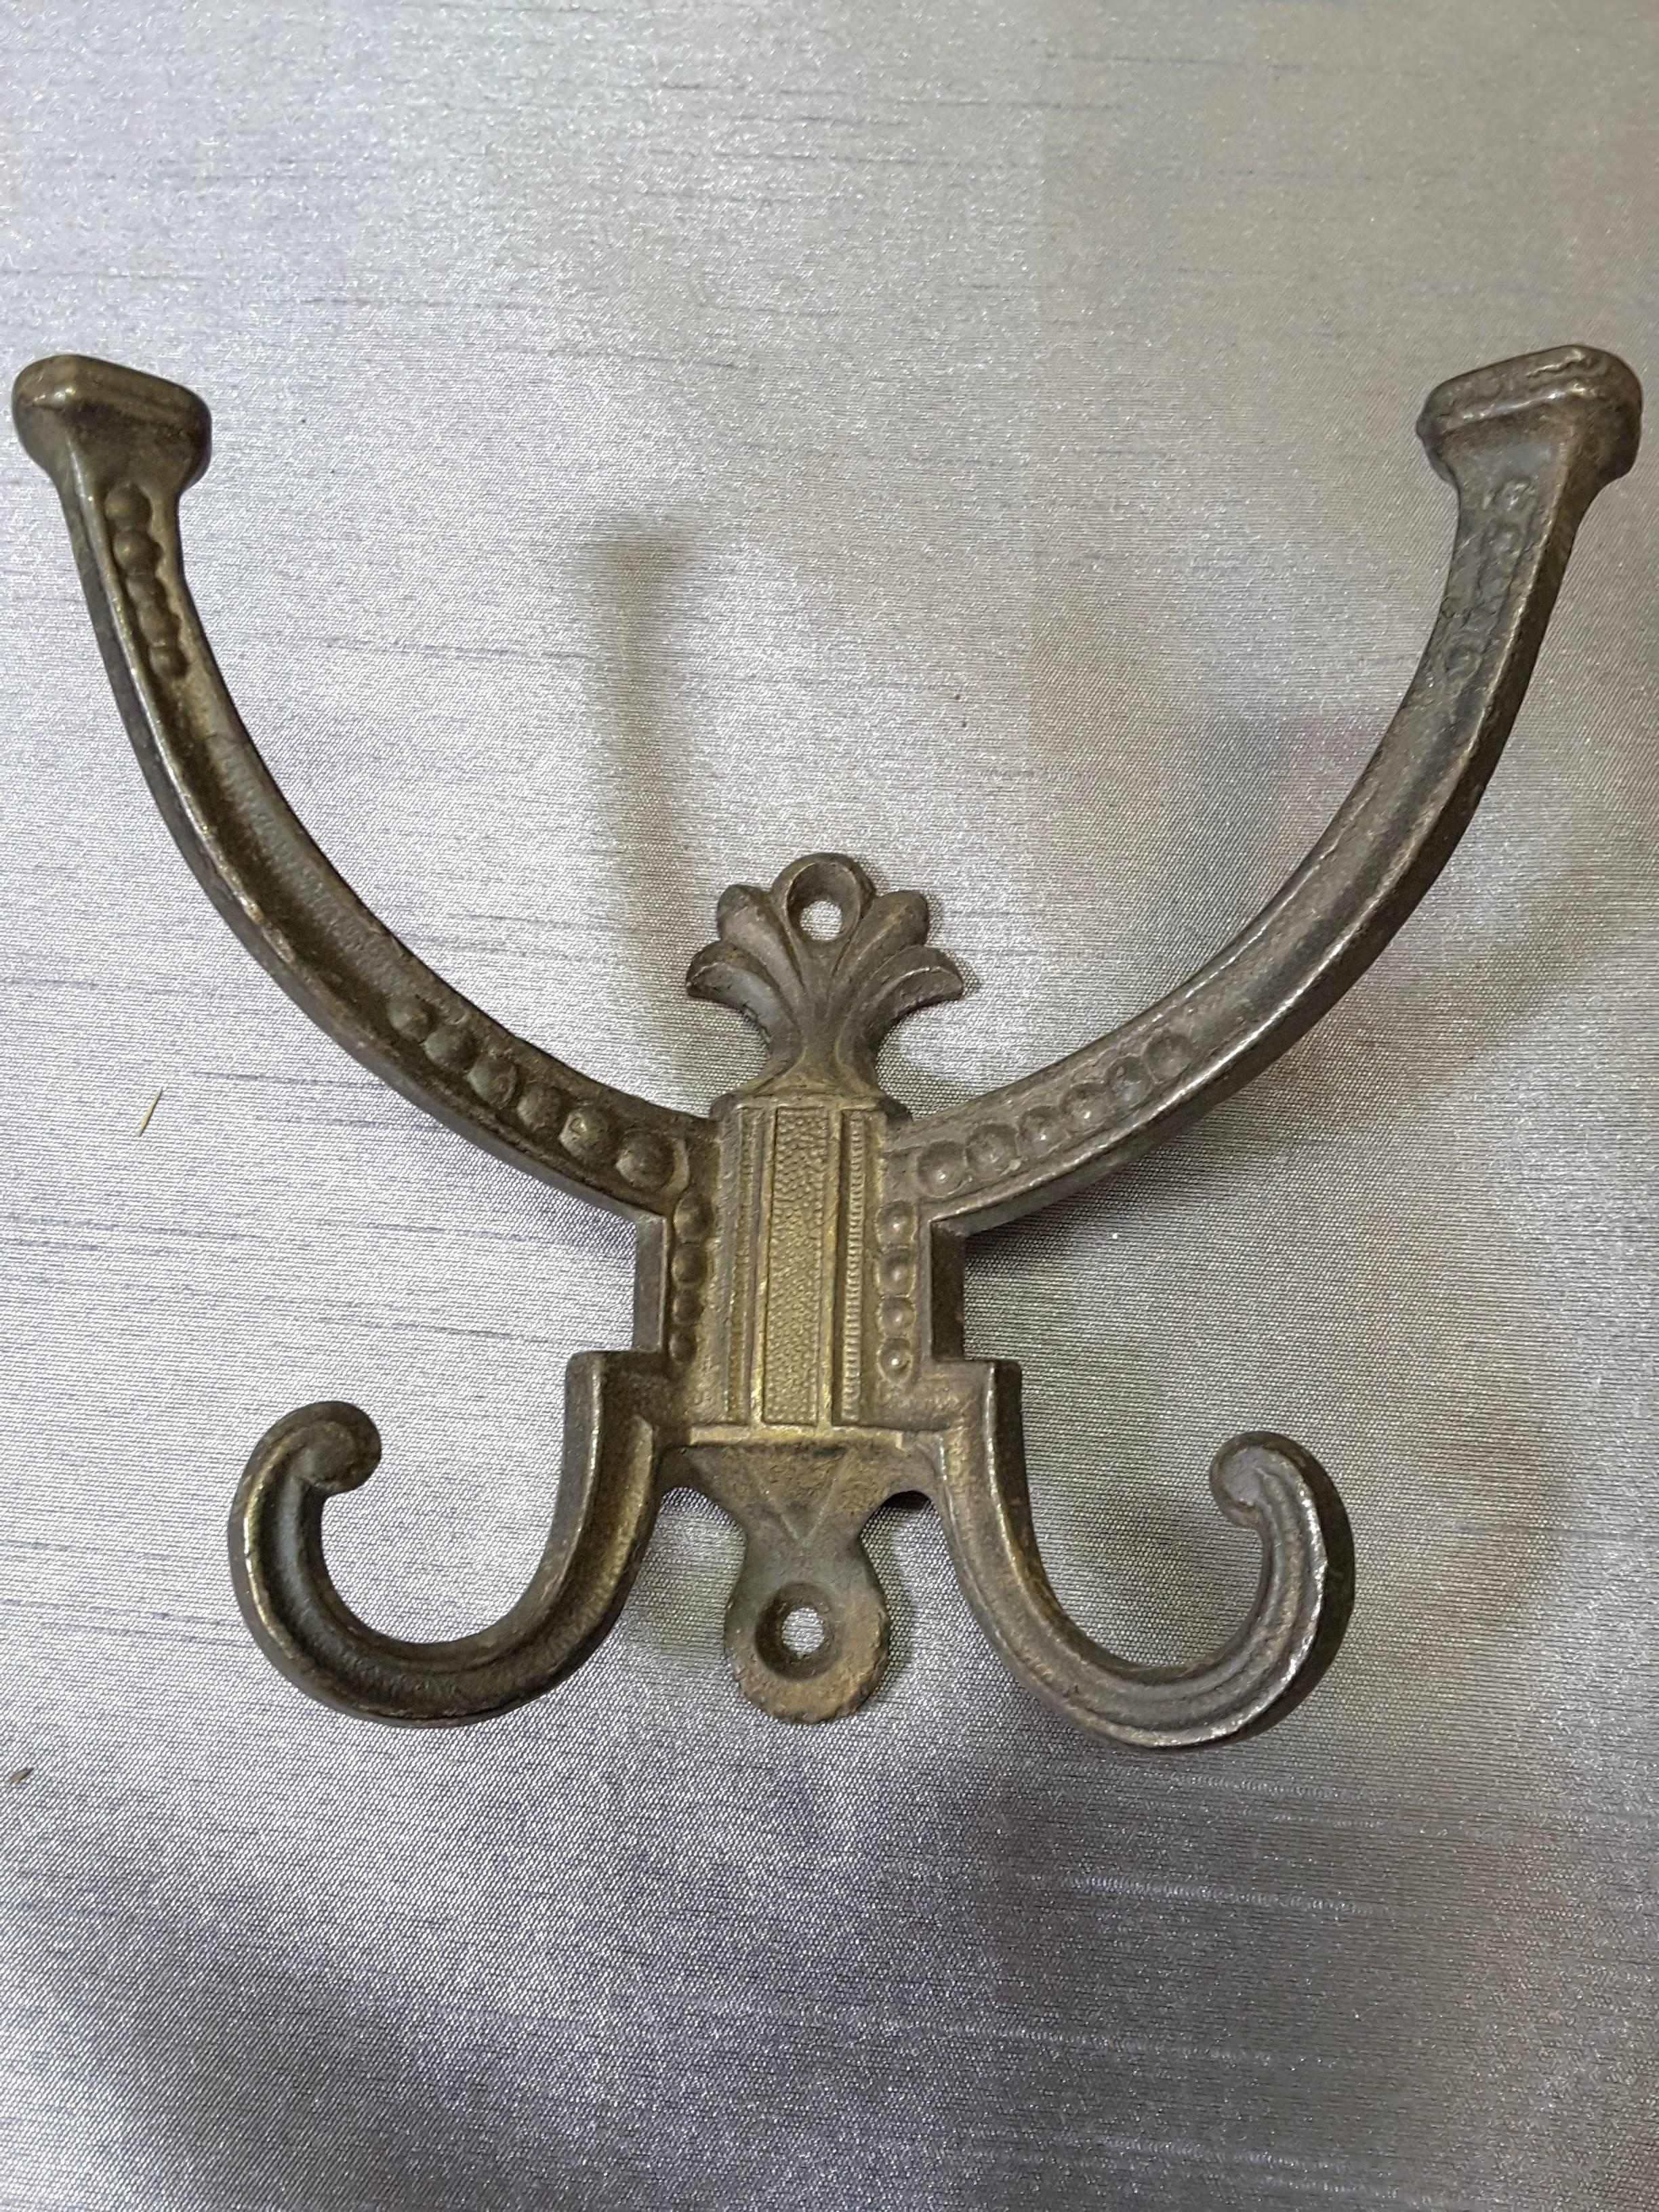 Iron Victorian Hallstand or Coat Rack Hooks, Set of Four, Dated 1878 and Marked